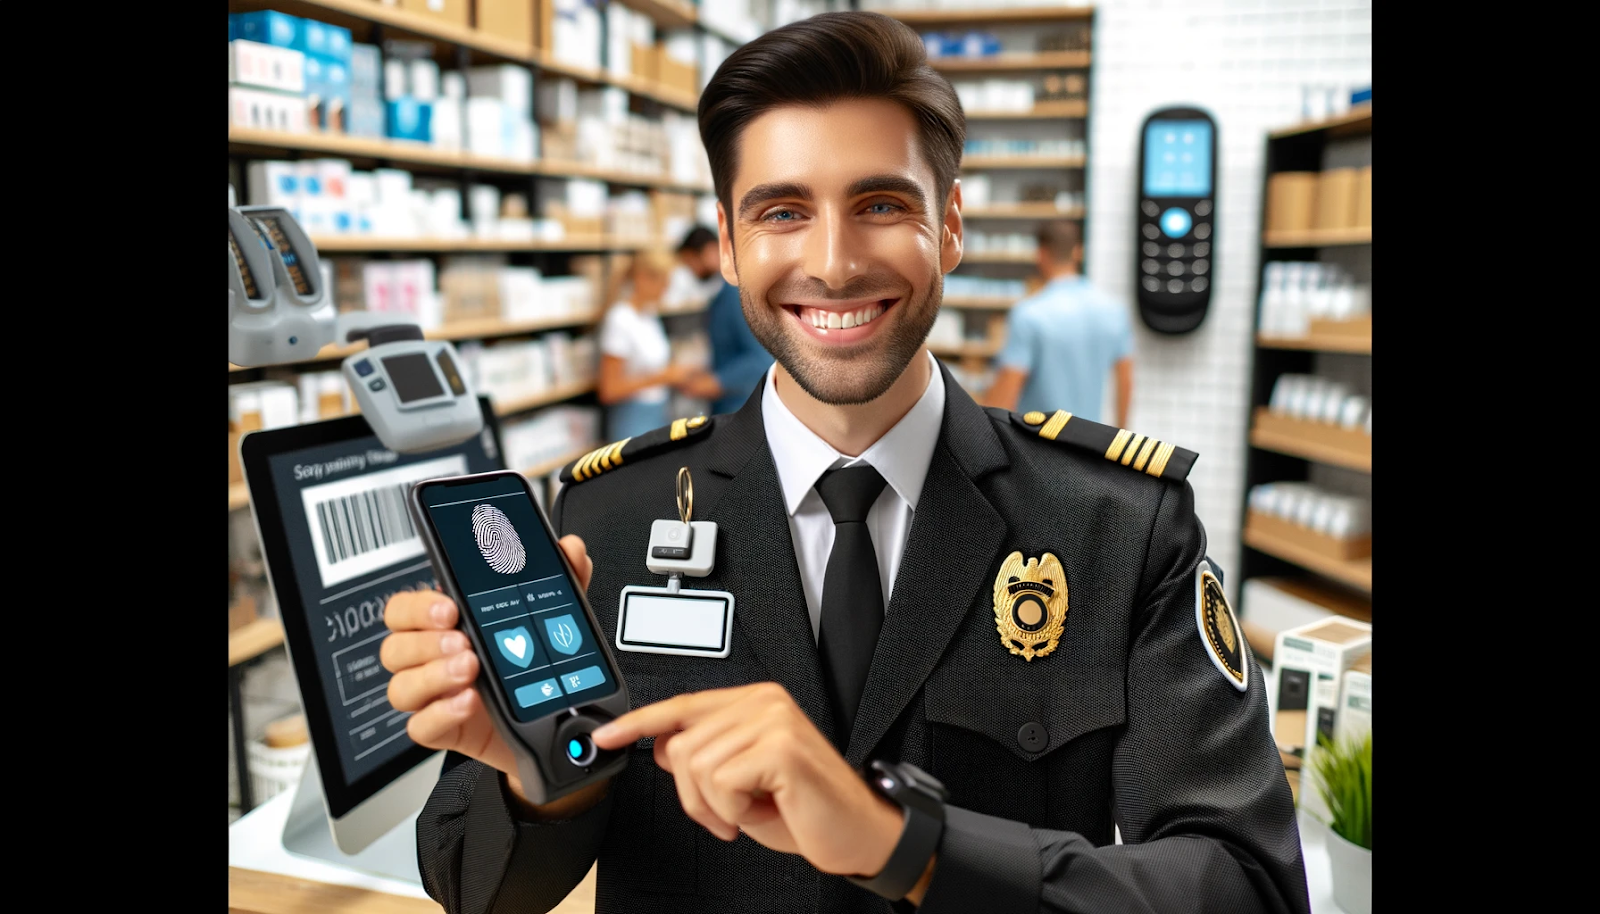 Cheerful security guard using advanced RFID and biometric systems in a retail store, ensuring security and efficiency.